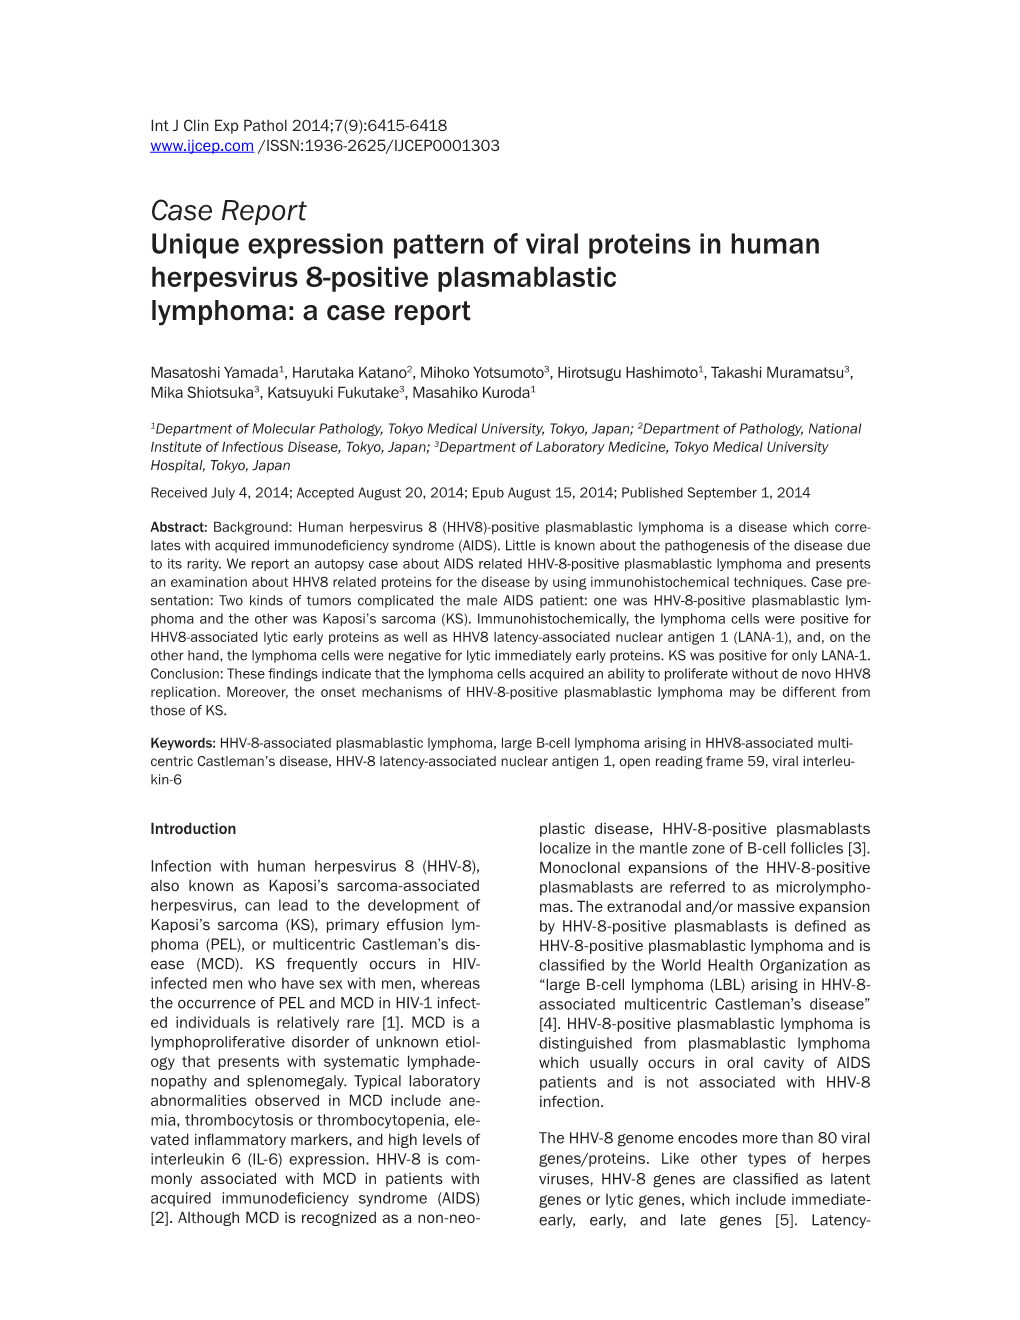 Case Report Unique Expression Pattern of Viral Proteins in Human Herpesvirus 8-Positive Plasmablastic Lymphoma: a Case Report